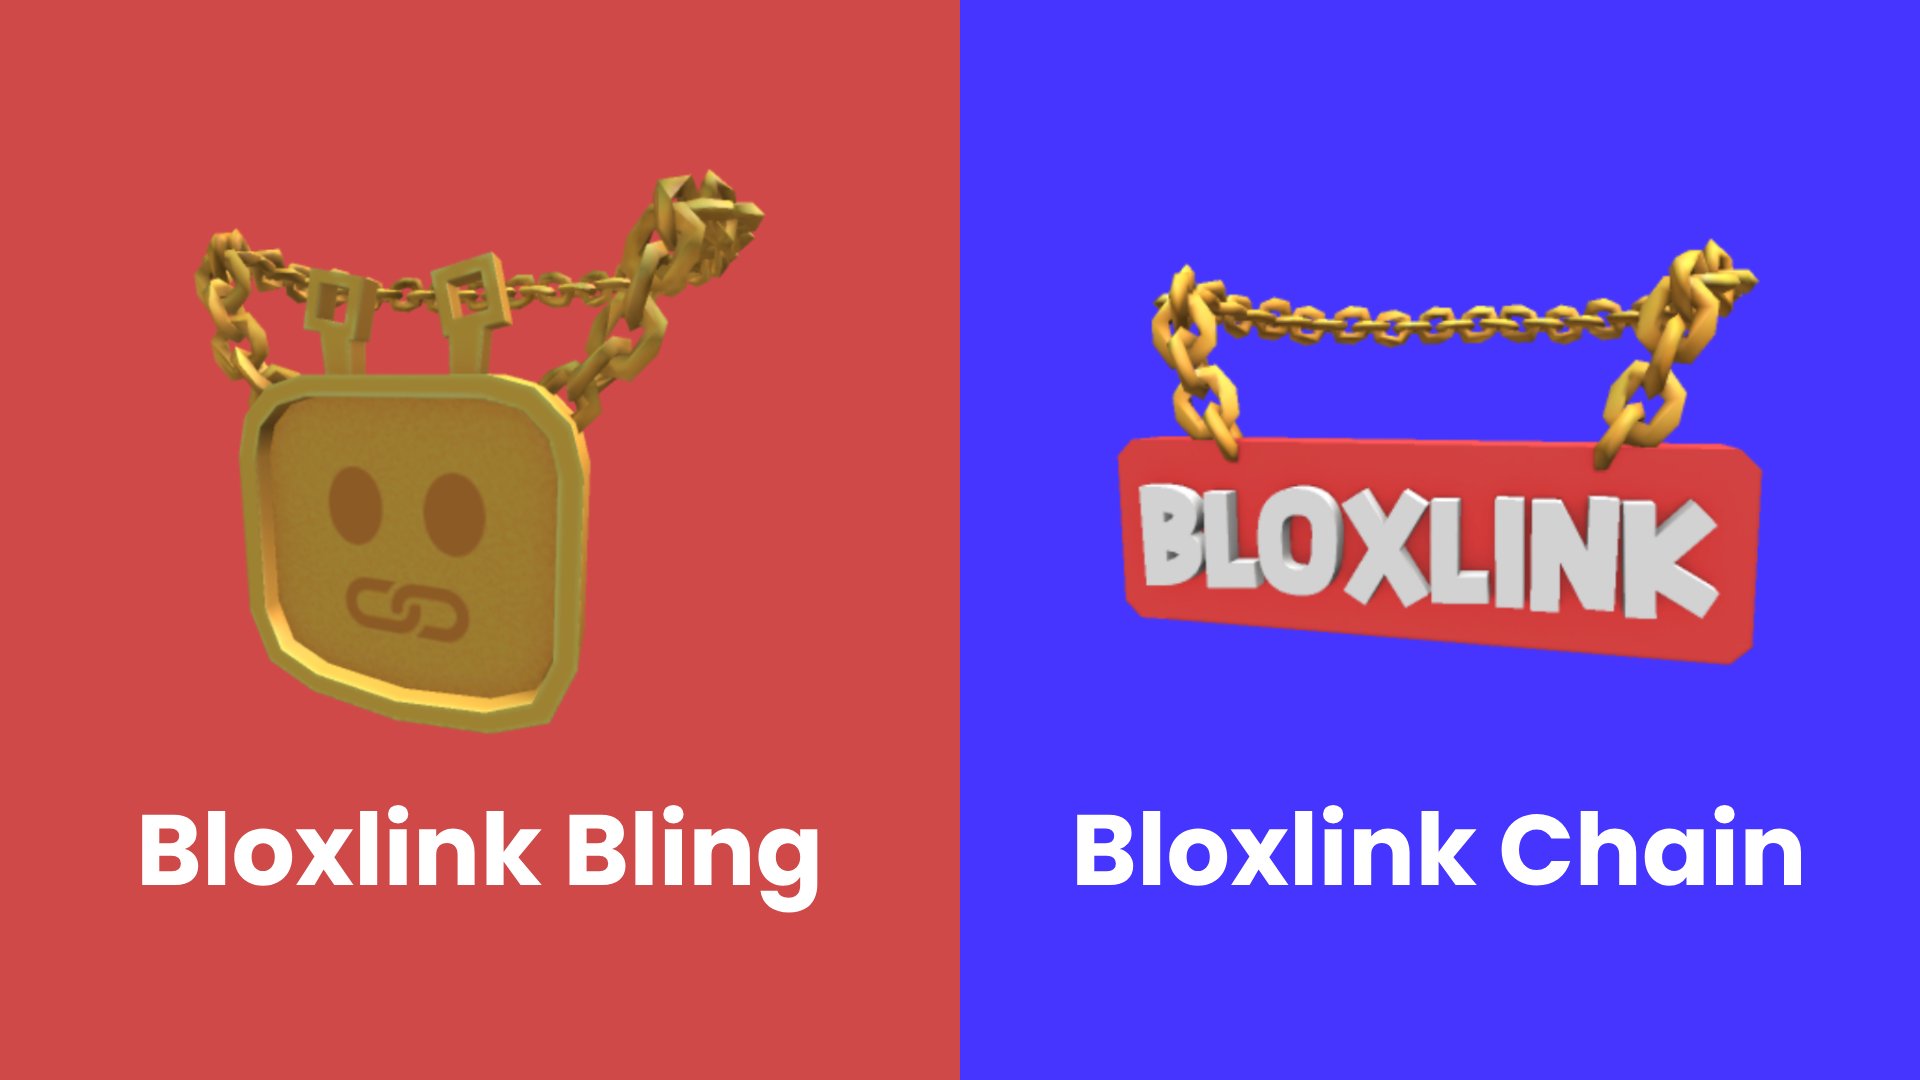 Setting up Bloxlink